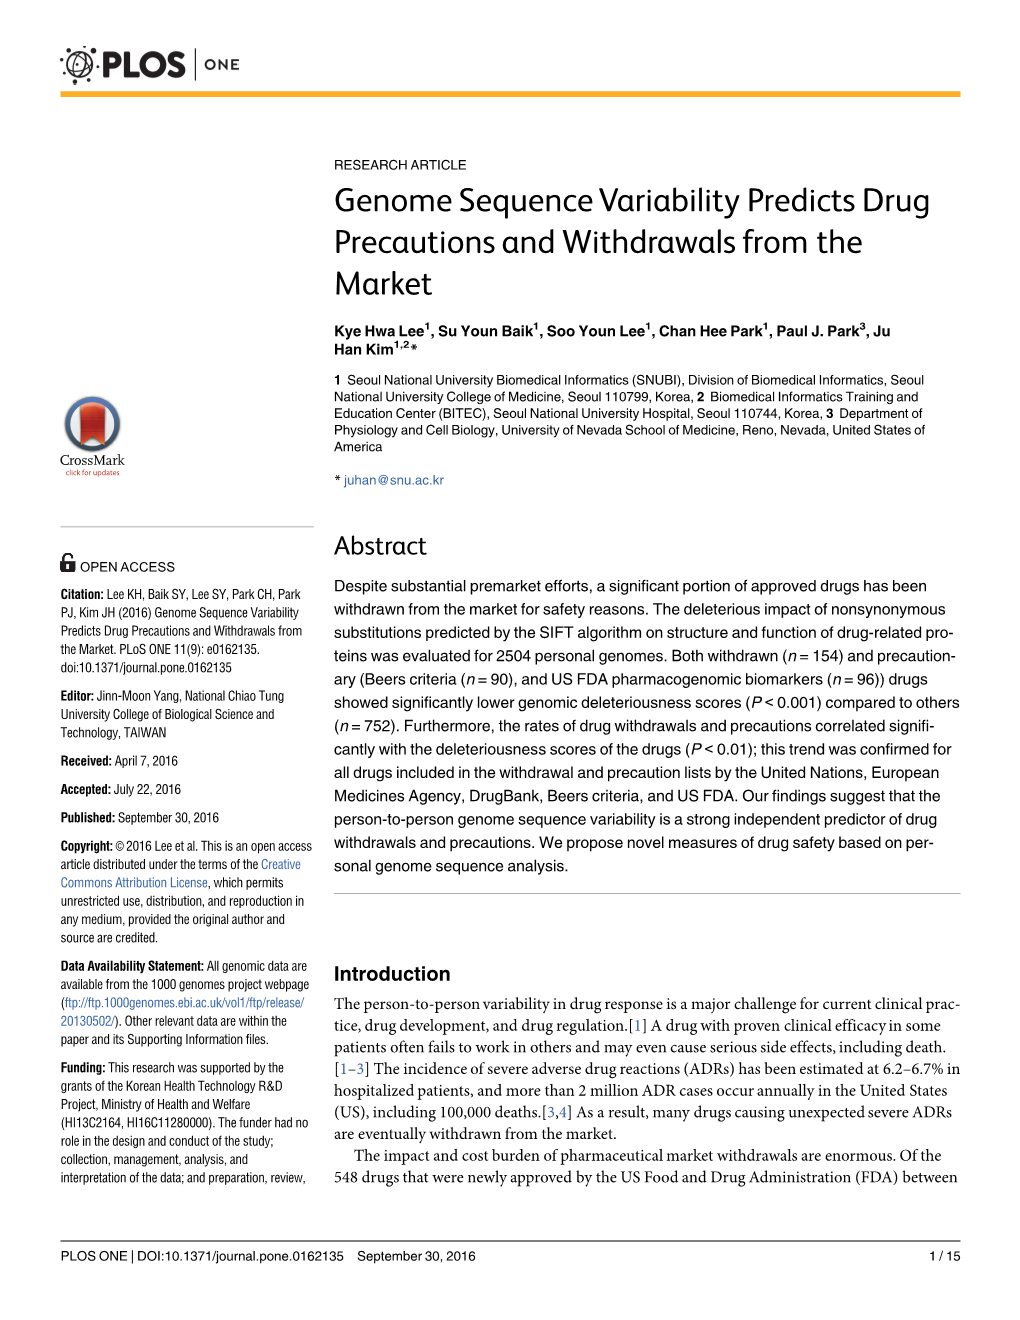 Genome Sequence Variability Predicts Drug Precautions and Withdrawals from the Market